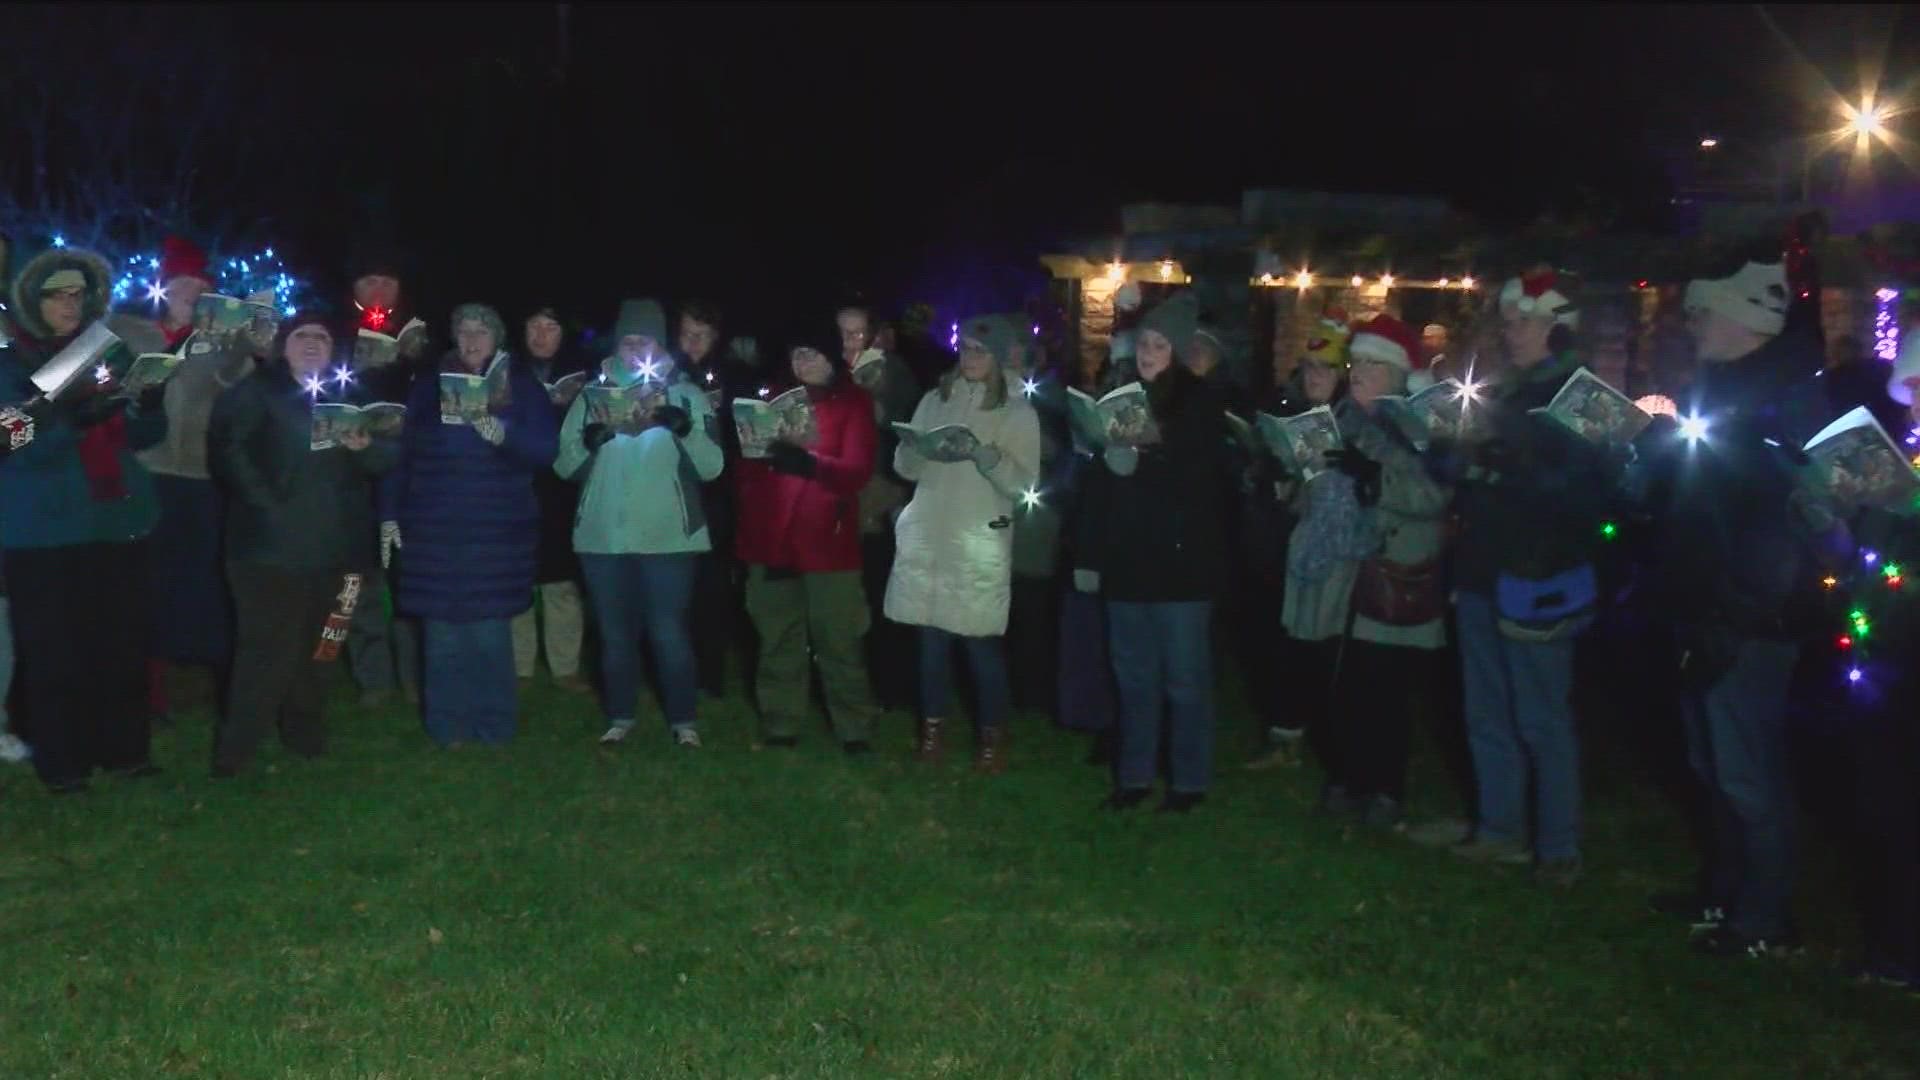 The Toledo Zoo's "Lights Before Christmas" had its annual tree-lighting ceremony Friday night. Before and after, the lines were full of excited happy faces.